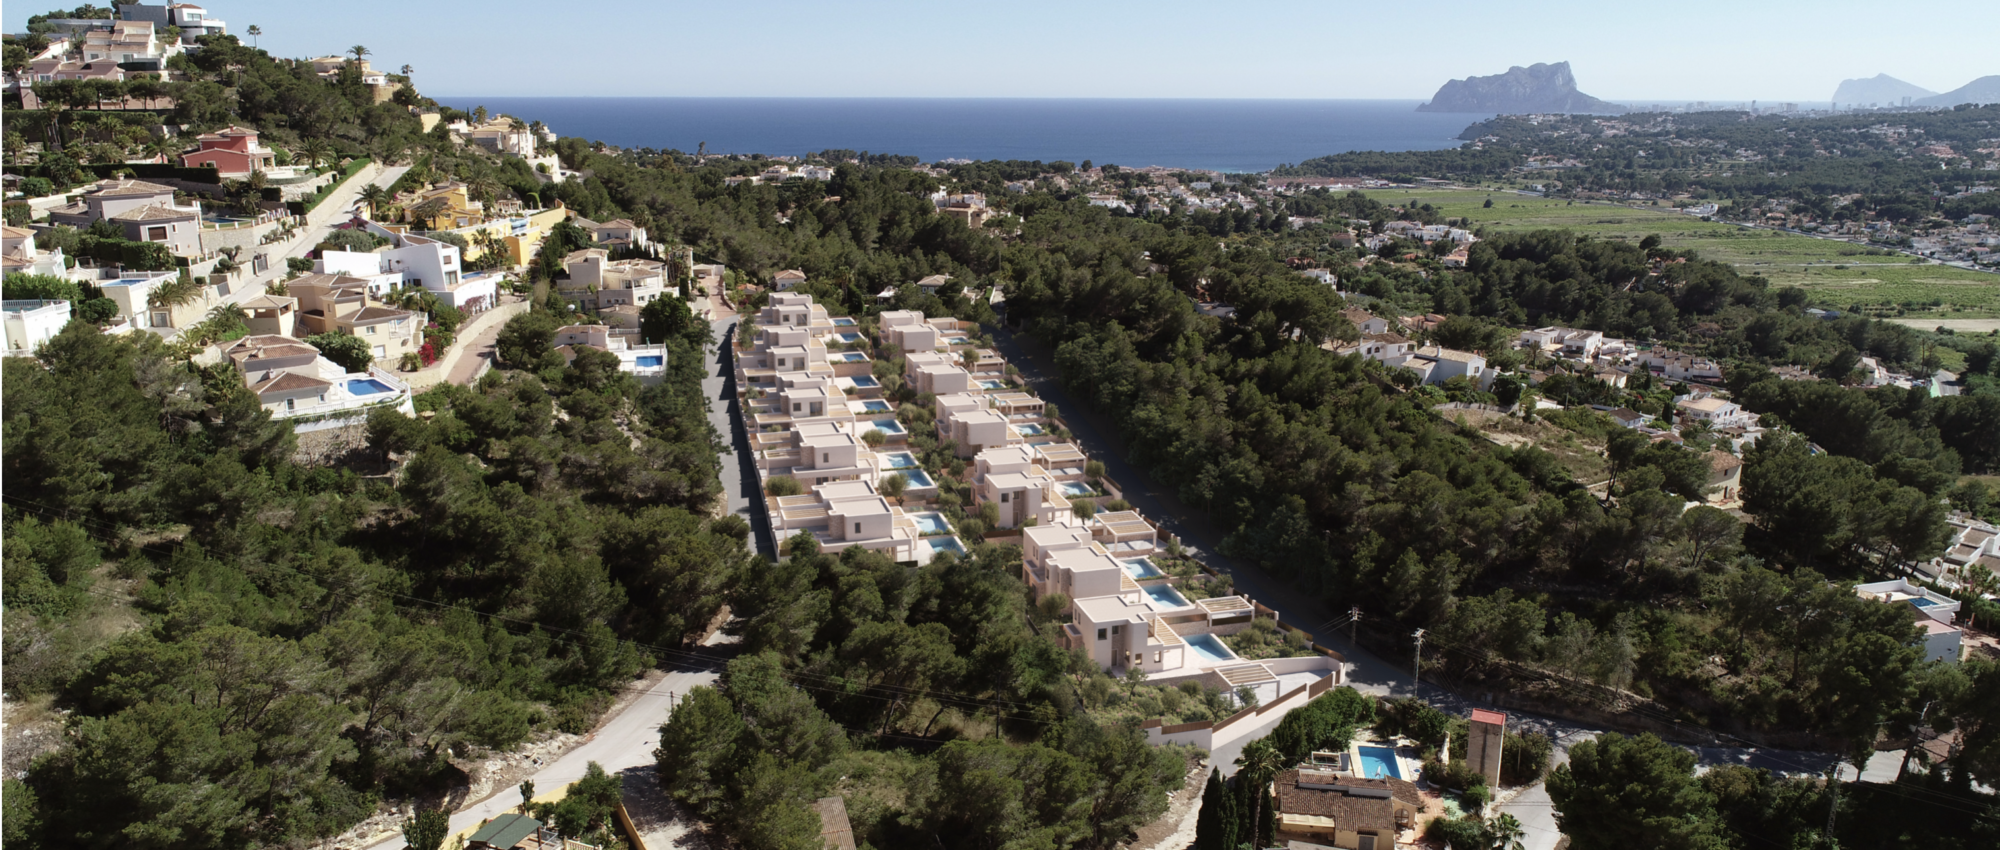 22 3 bedroom 3 bathroom new luxury villas 5 minutes from the town of Moraira